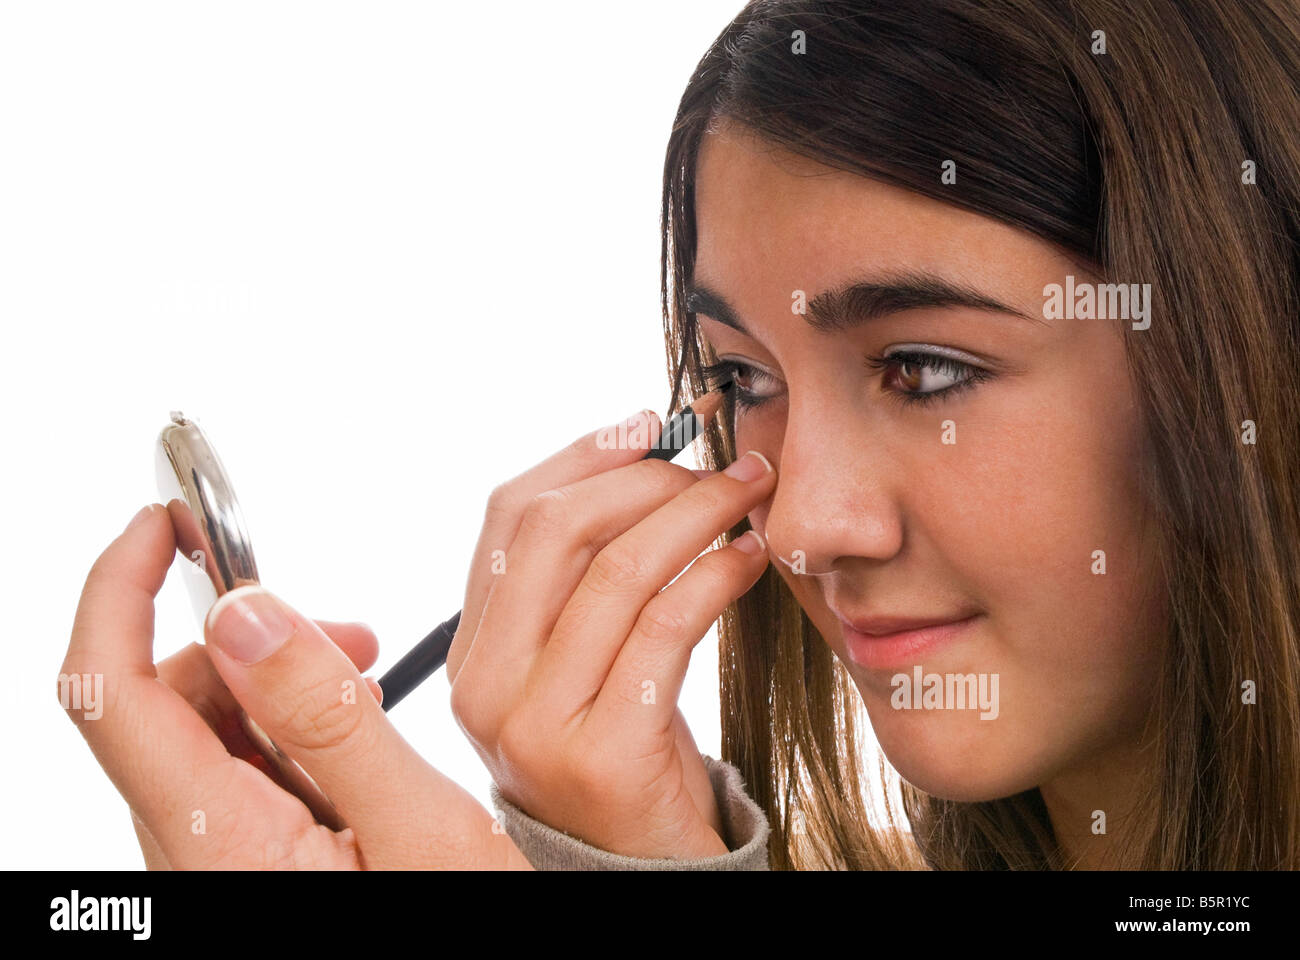 Horizontal portrait of a young girl applying black kohl eyeliner around her eyes in a compact mirror against a white background Stock Photo